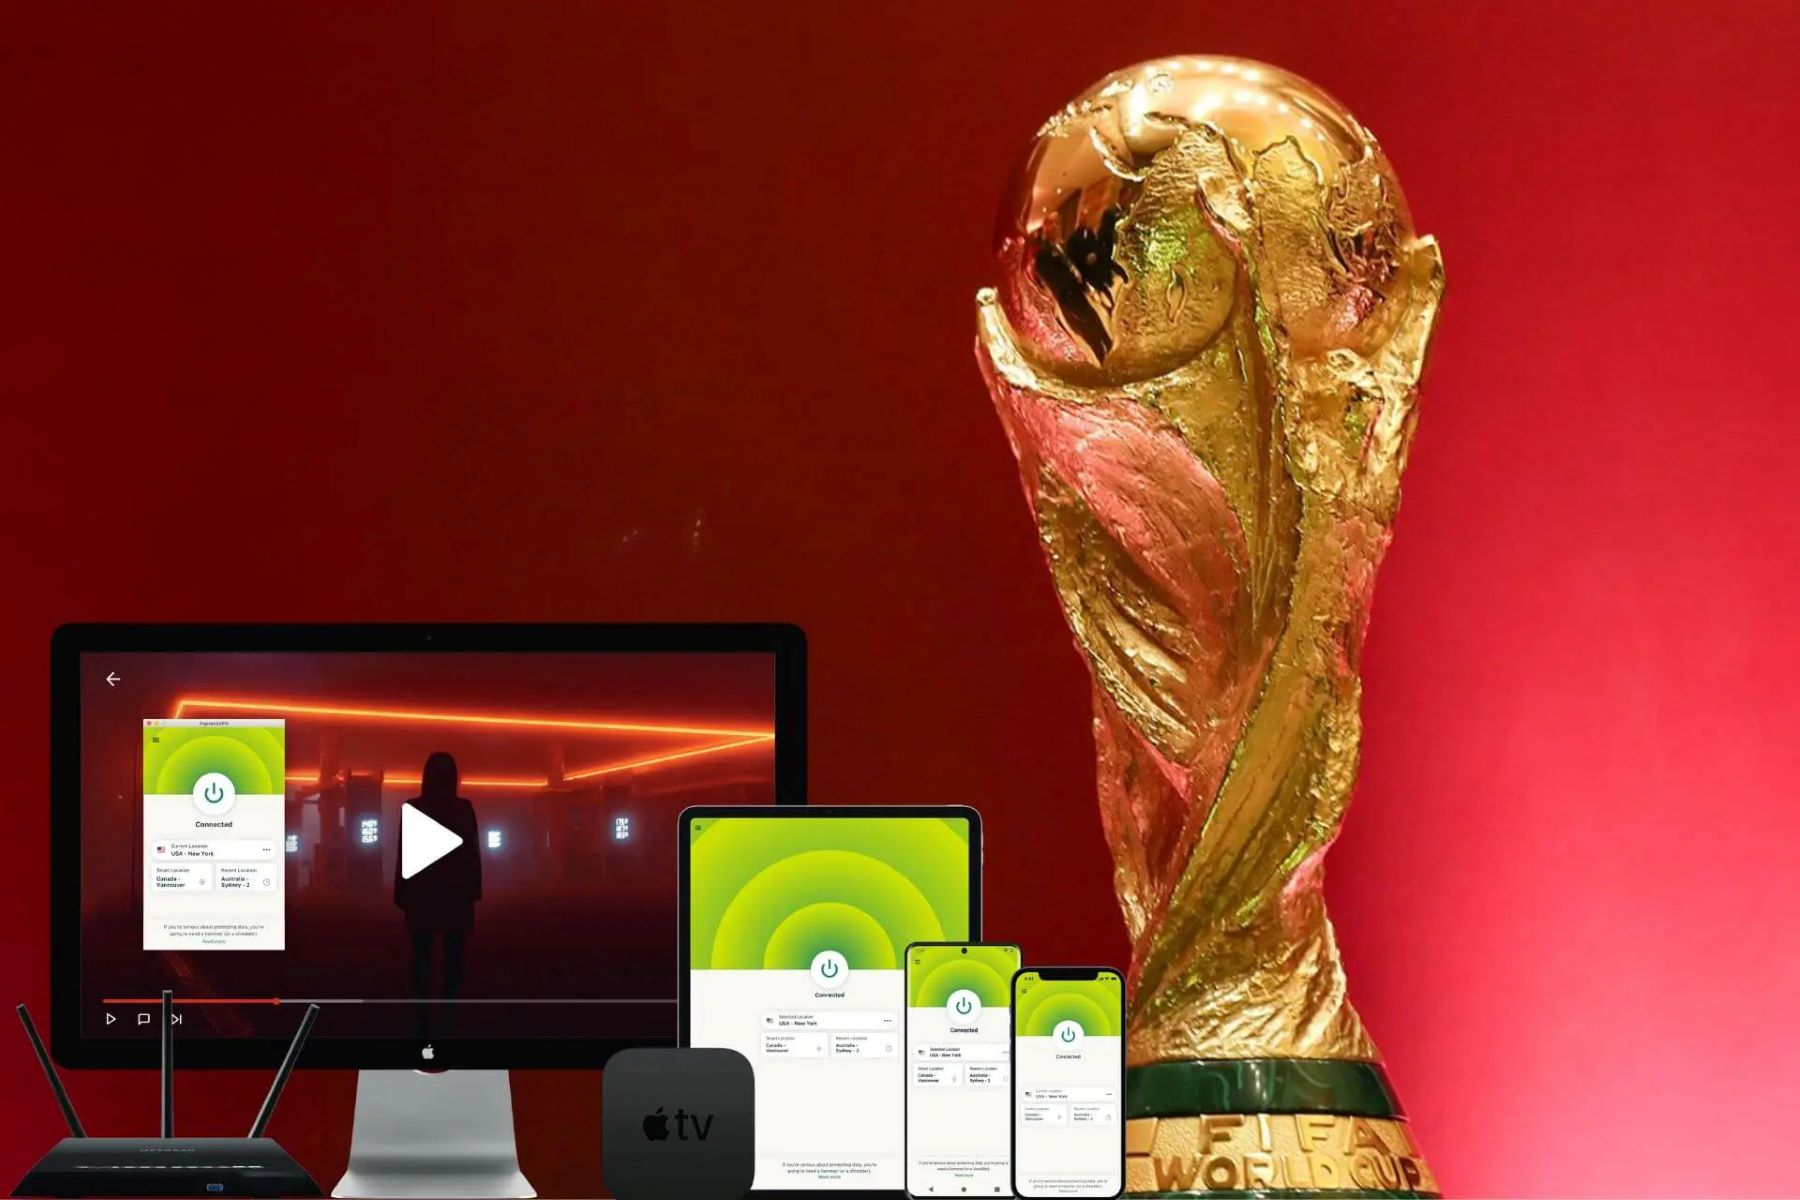 How To Watch The World Cup Free Online